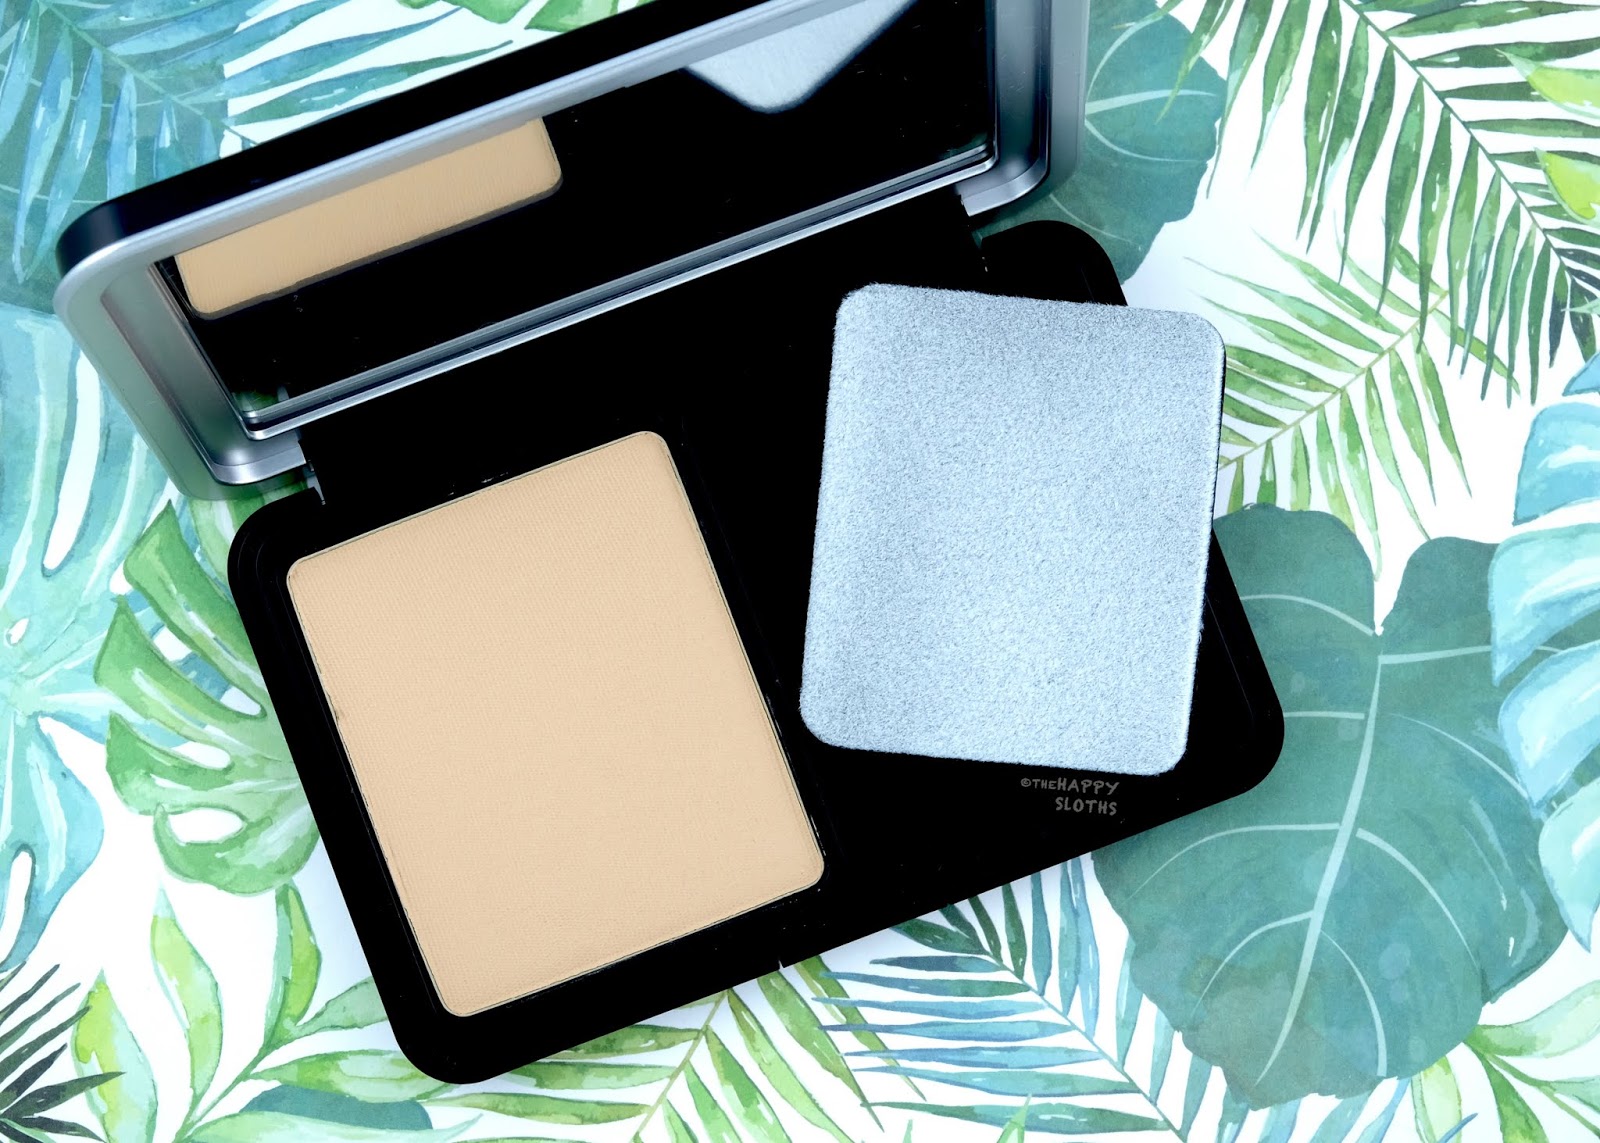 Make Up For Ever | Matte Velvet Skin Blurring Powder Foundation in "Y225 Marble": Review and Swatches